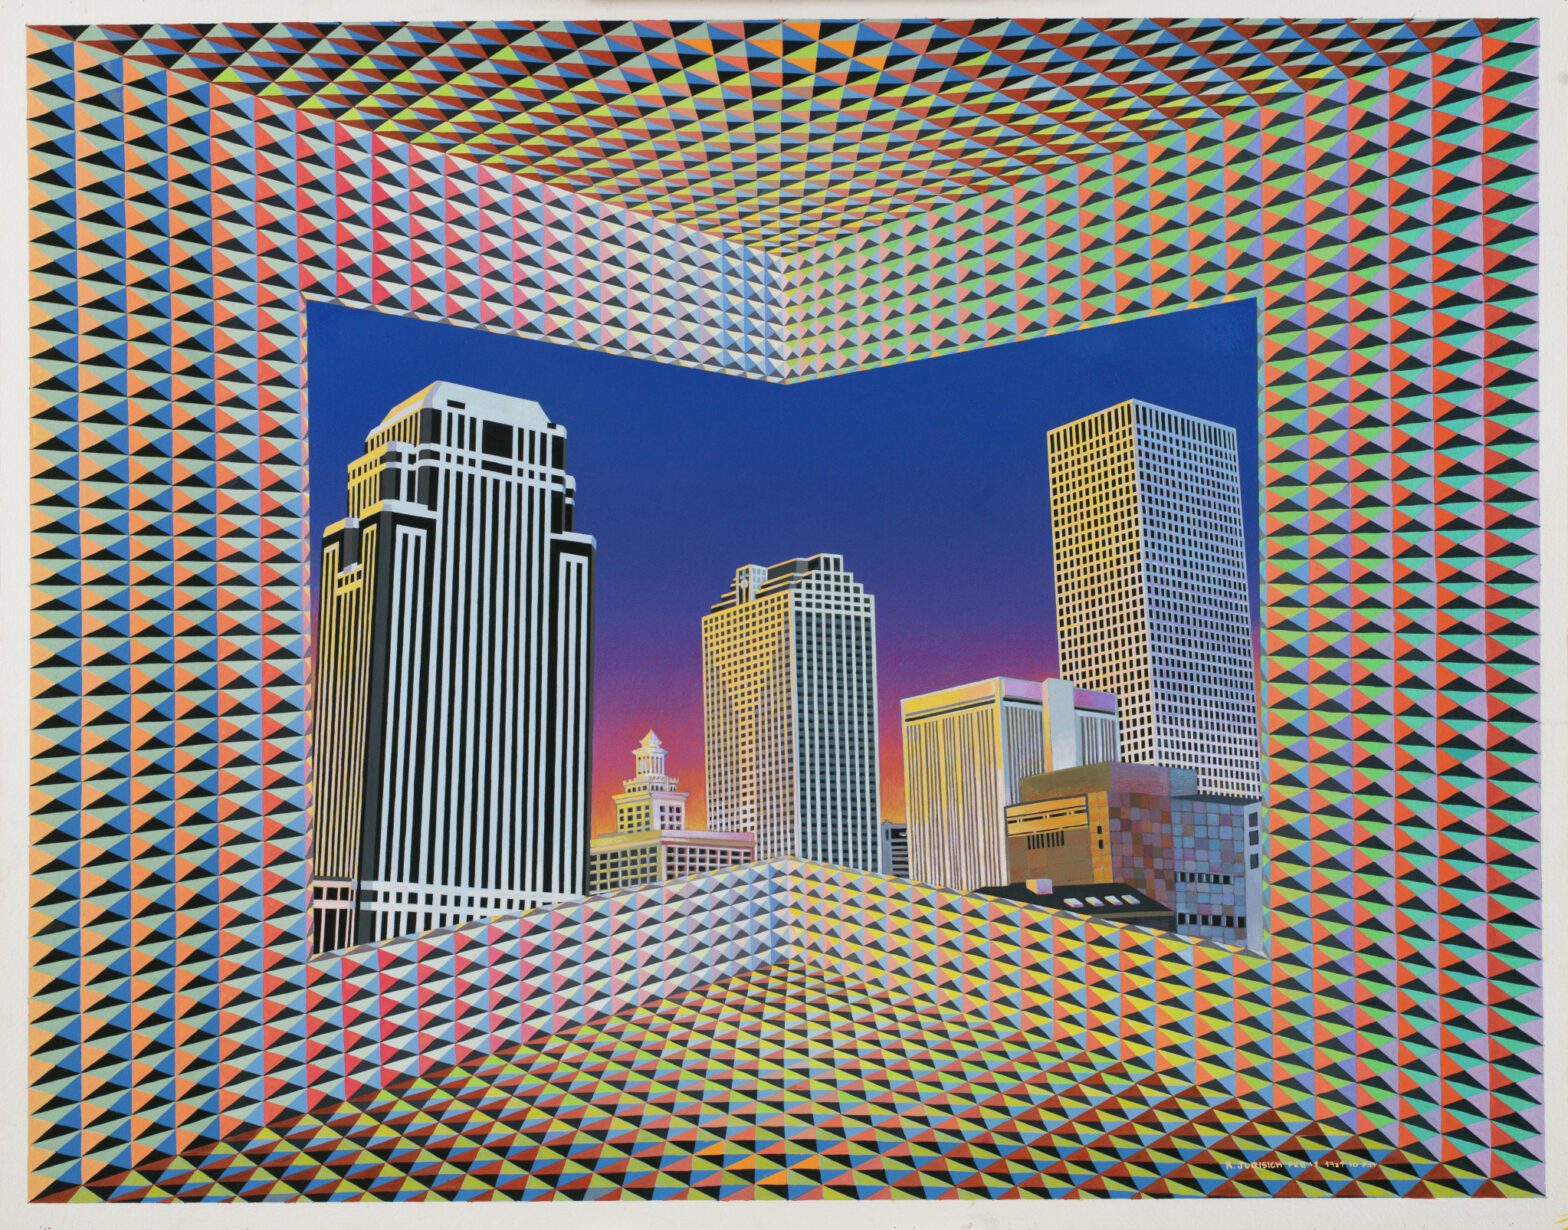 Cityscape, by Krista Jurisich. Created in 1987. Gouache on paper.